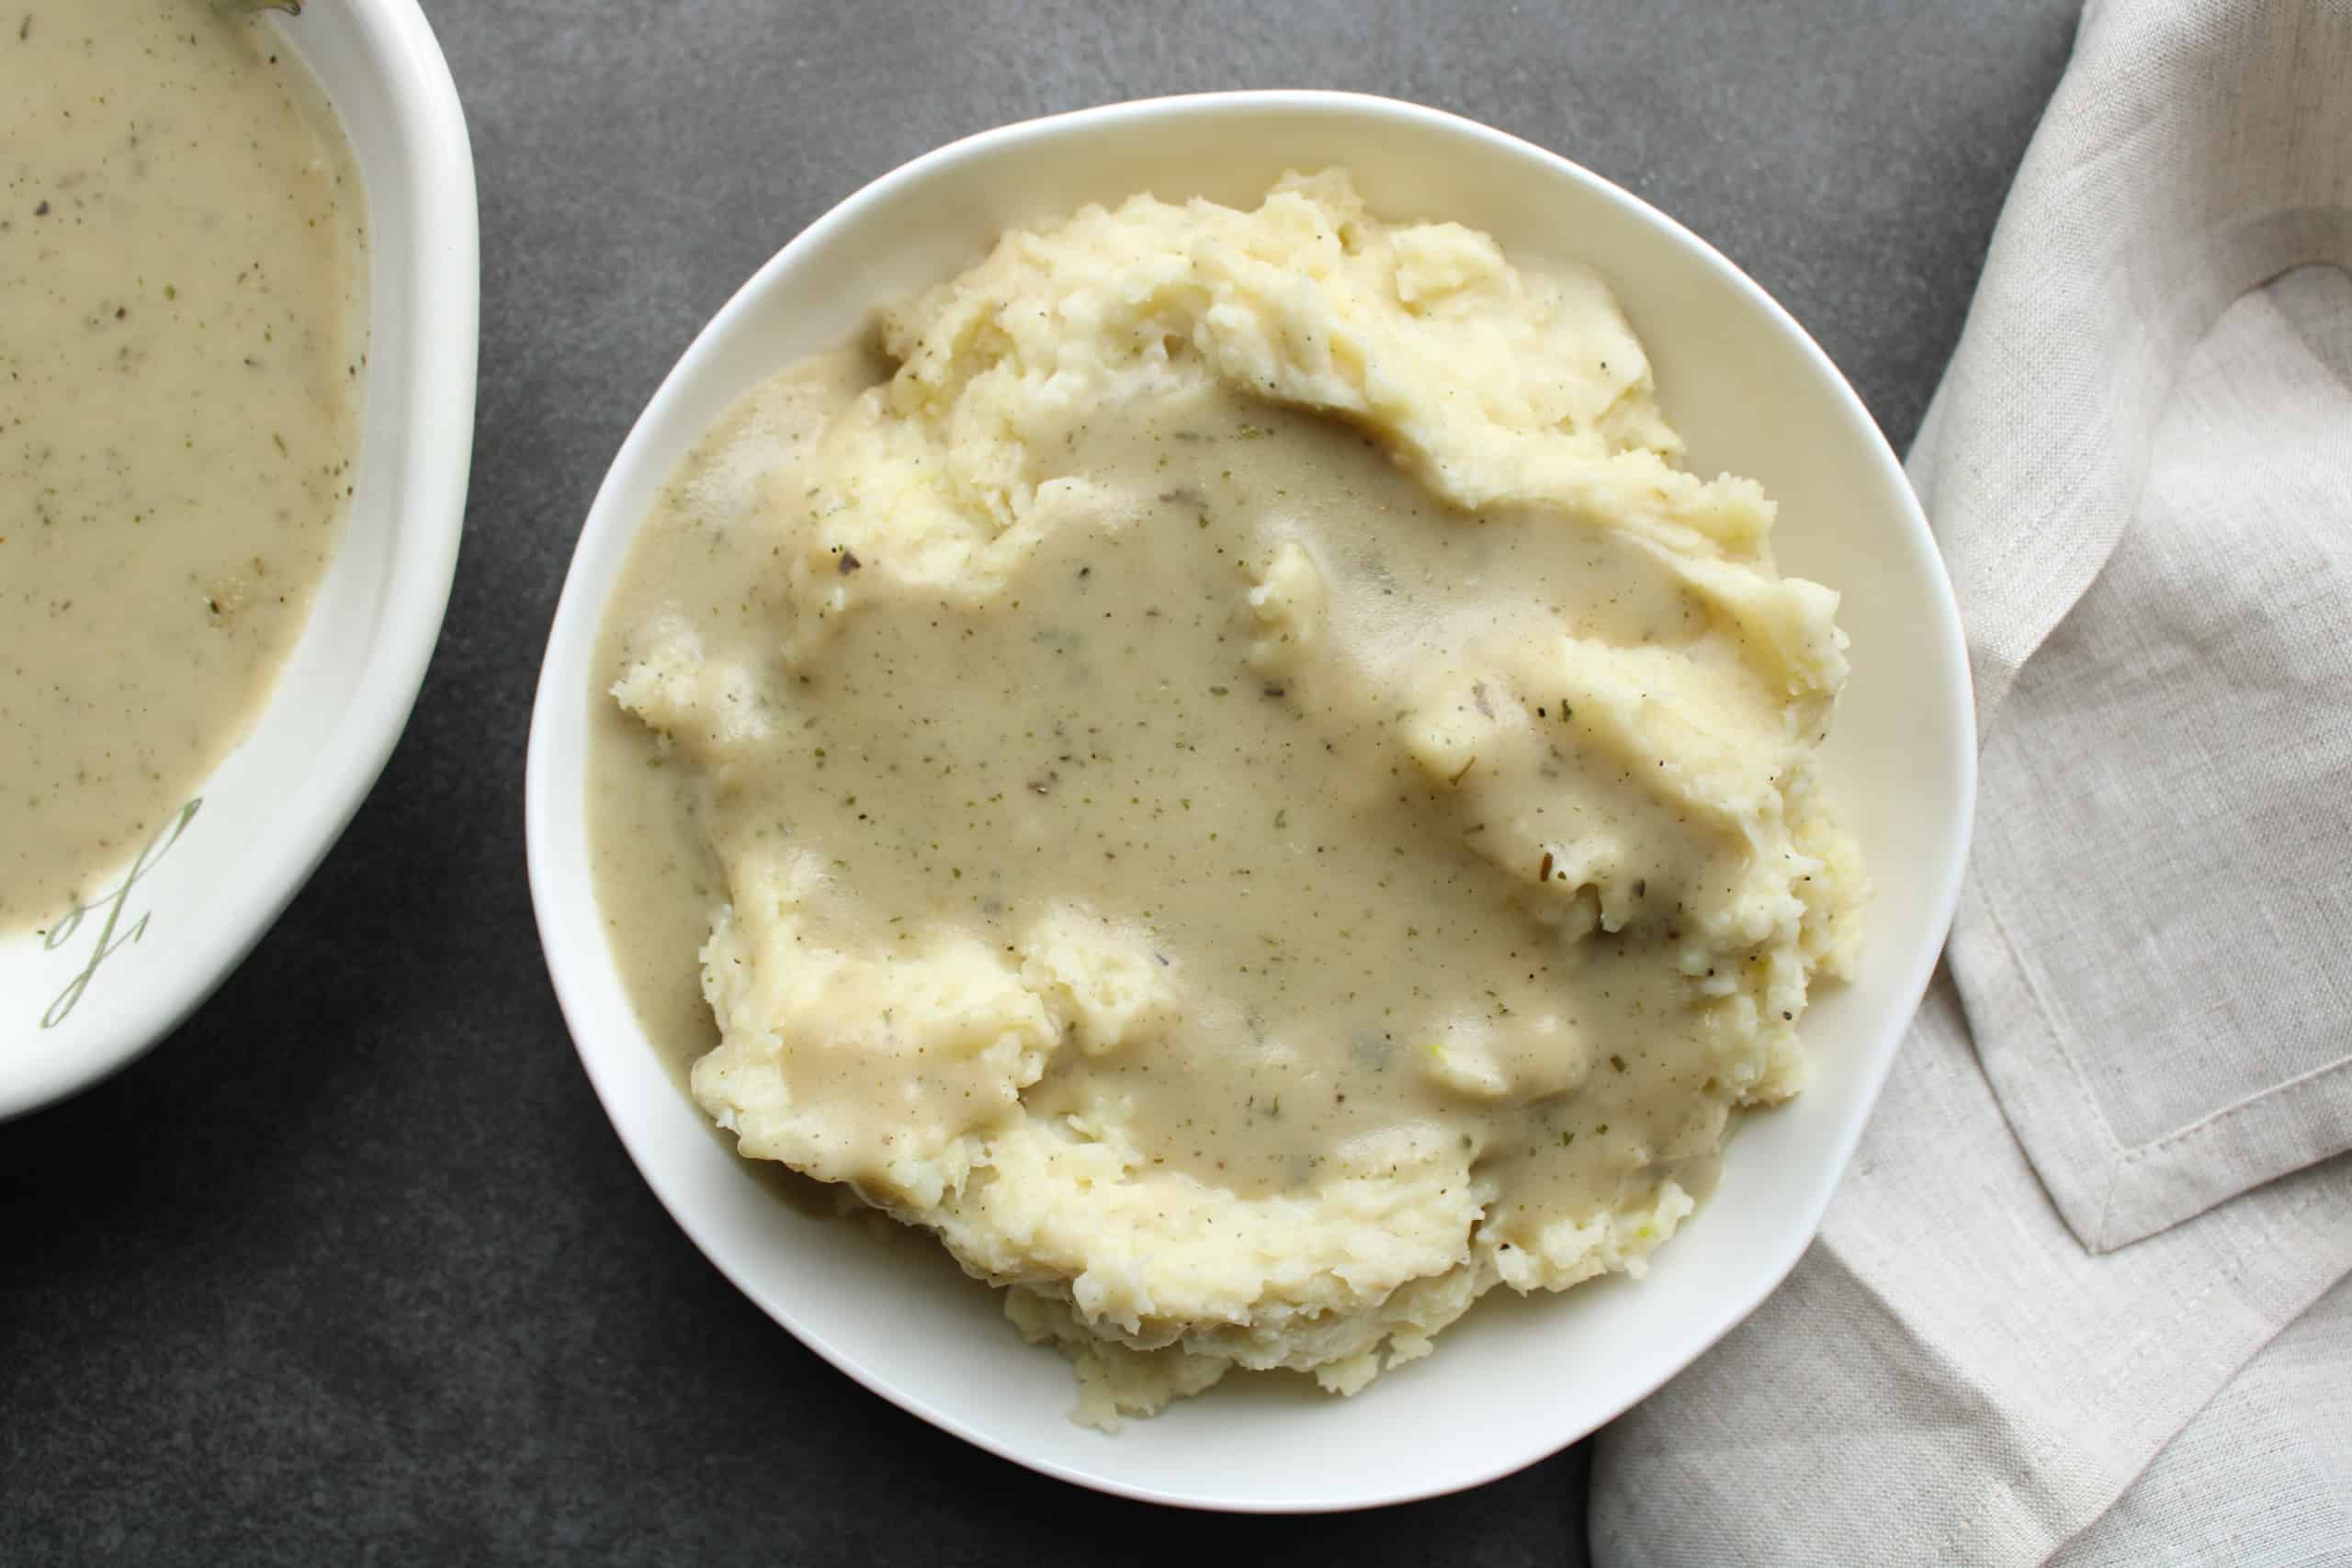 Homemade gravy over mashed potatoes in a bowl on the table.